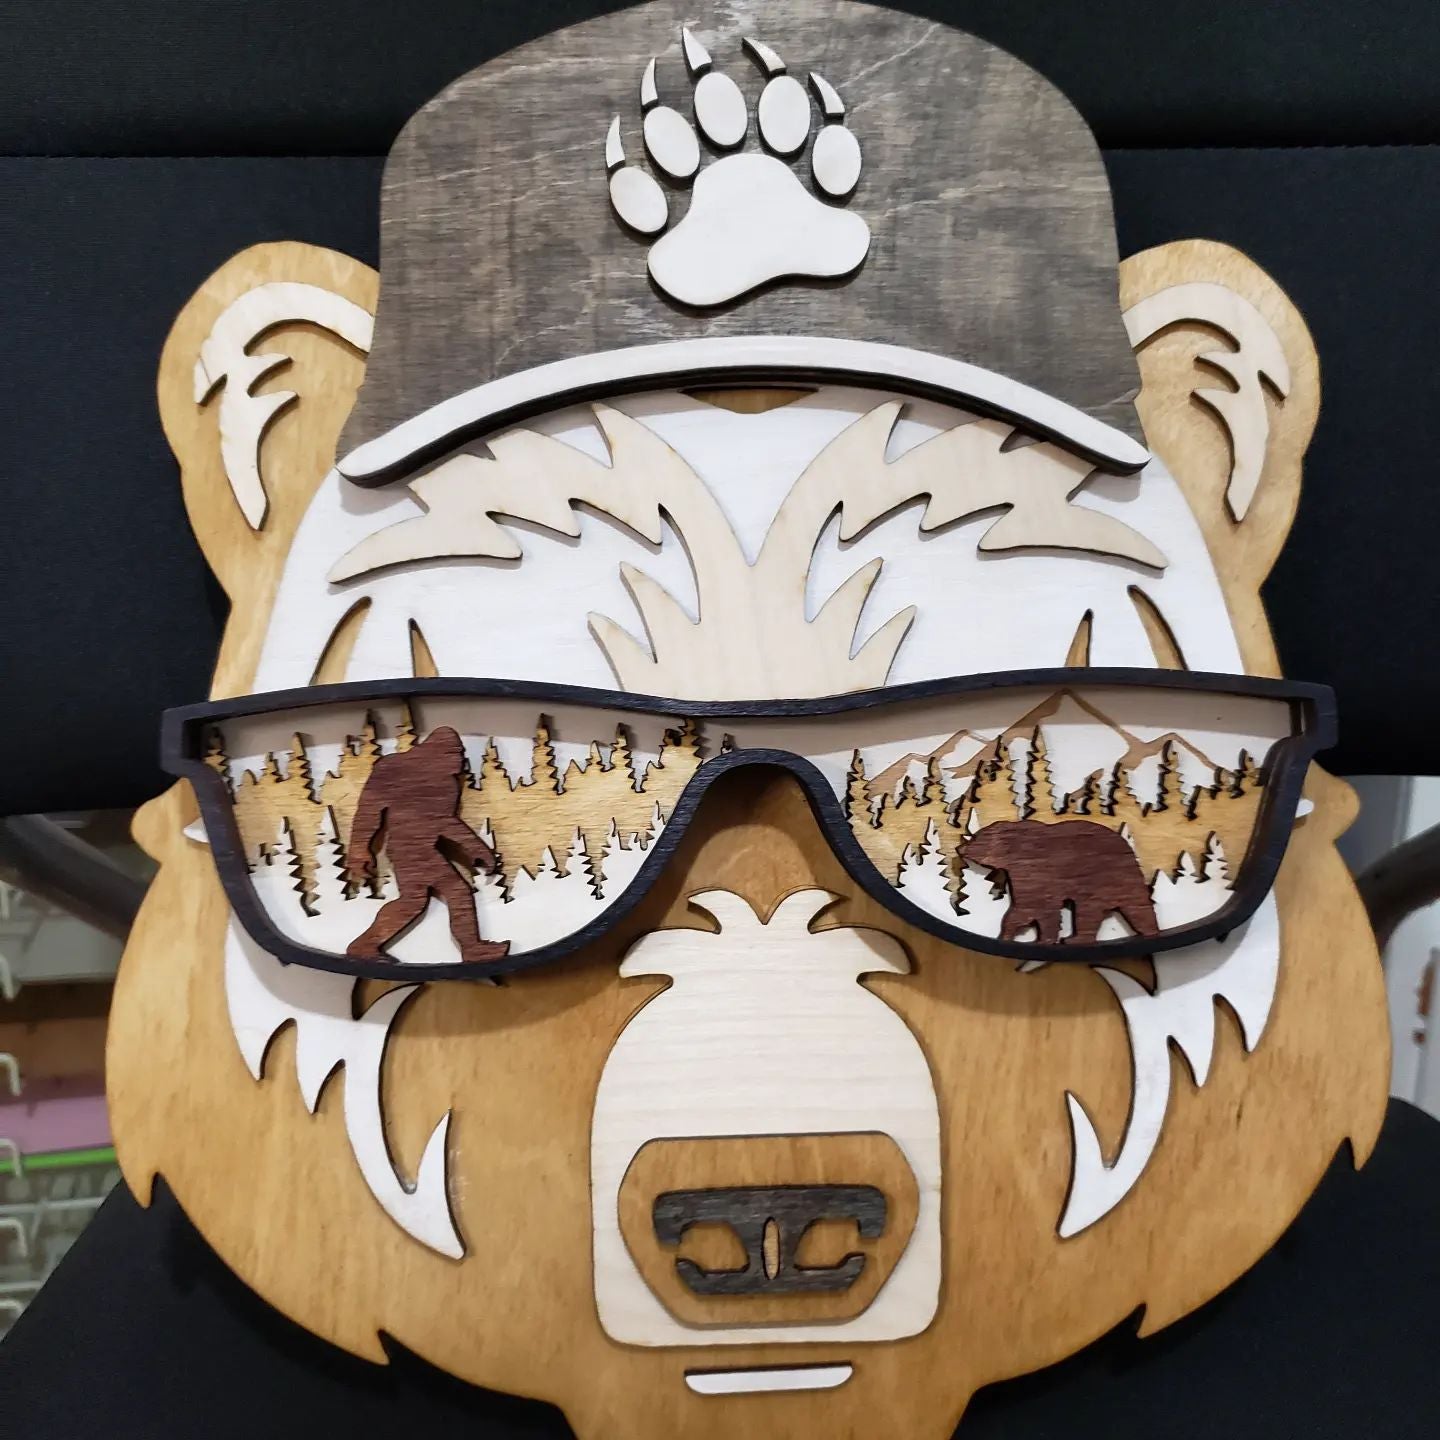  Add a unique touch to your home decor with the Bear Wall Decor. This 7-layer, laser cut wooden wall art features a hand-painted bear head, reflecting both bigfoot and nature. It's crafted from birch wood and is shipped within 5 to 7 days. Make a statement with this one-of-a-kind wall piece!